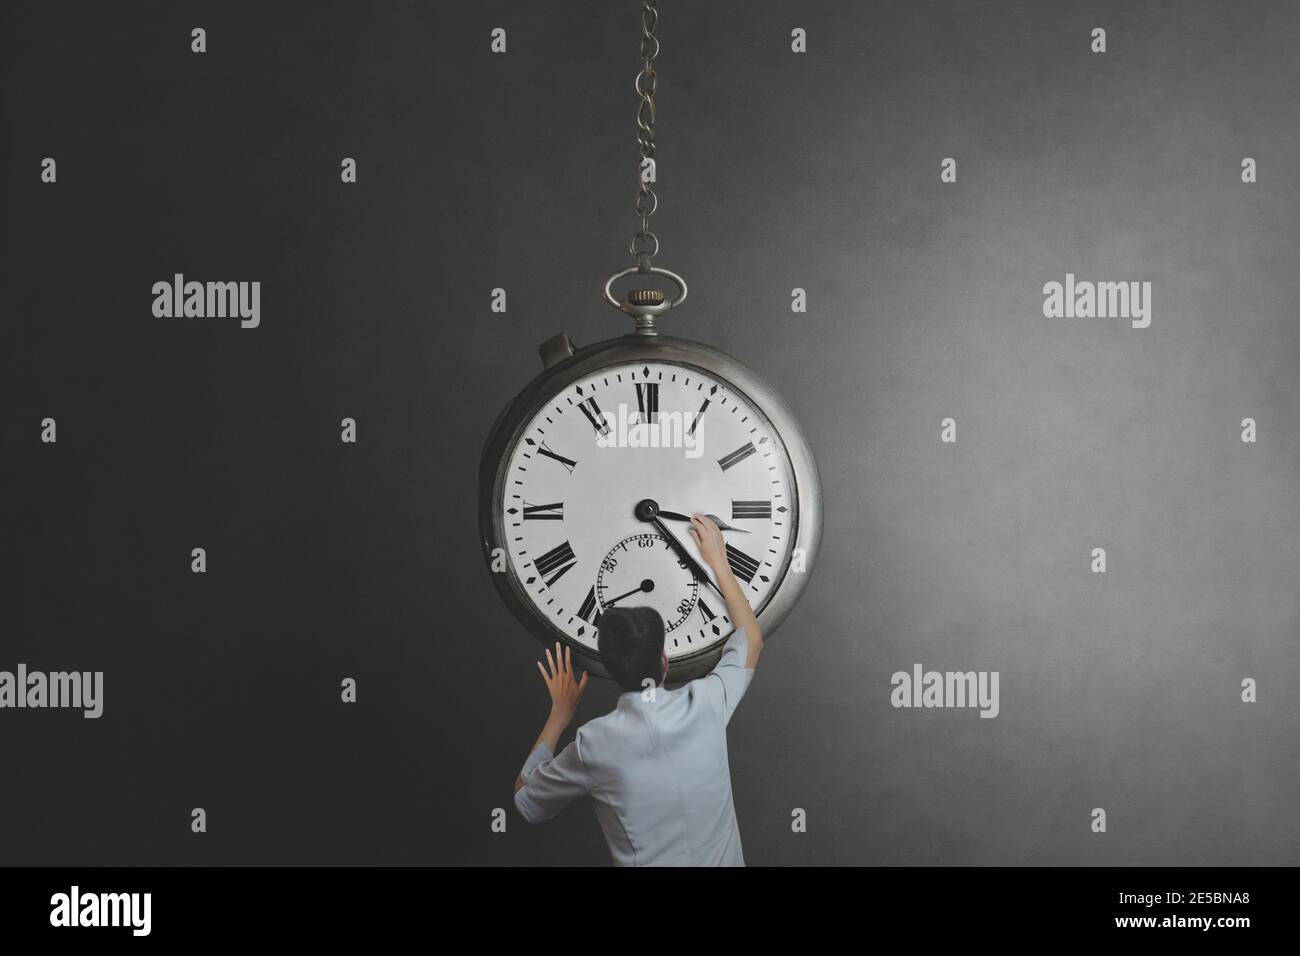 surreal moment of a woman trying to control time Stock Photo